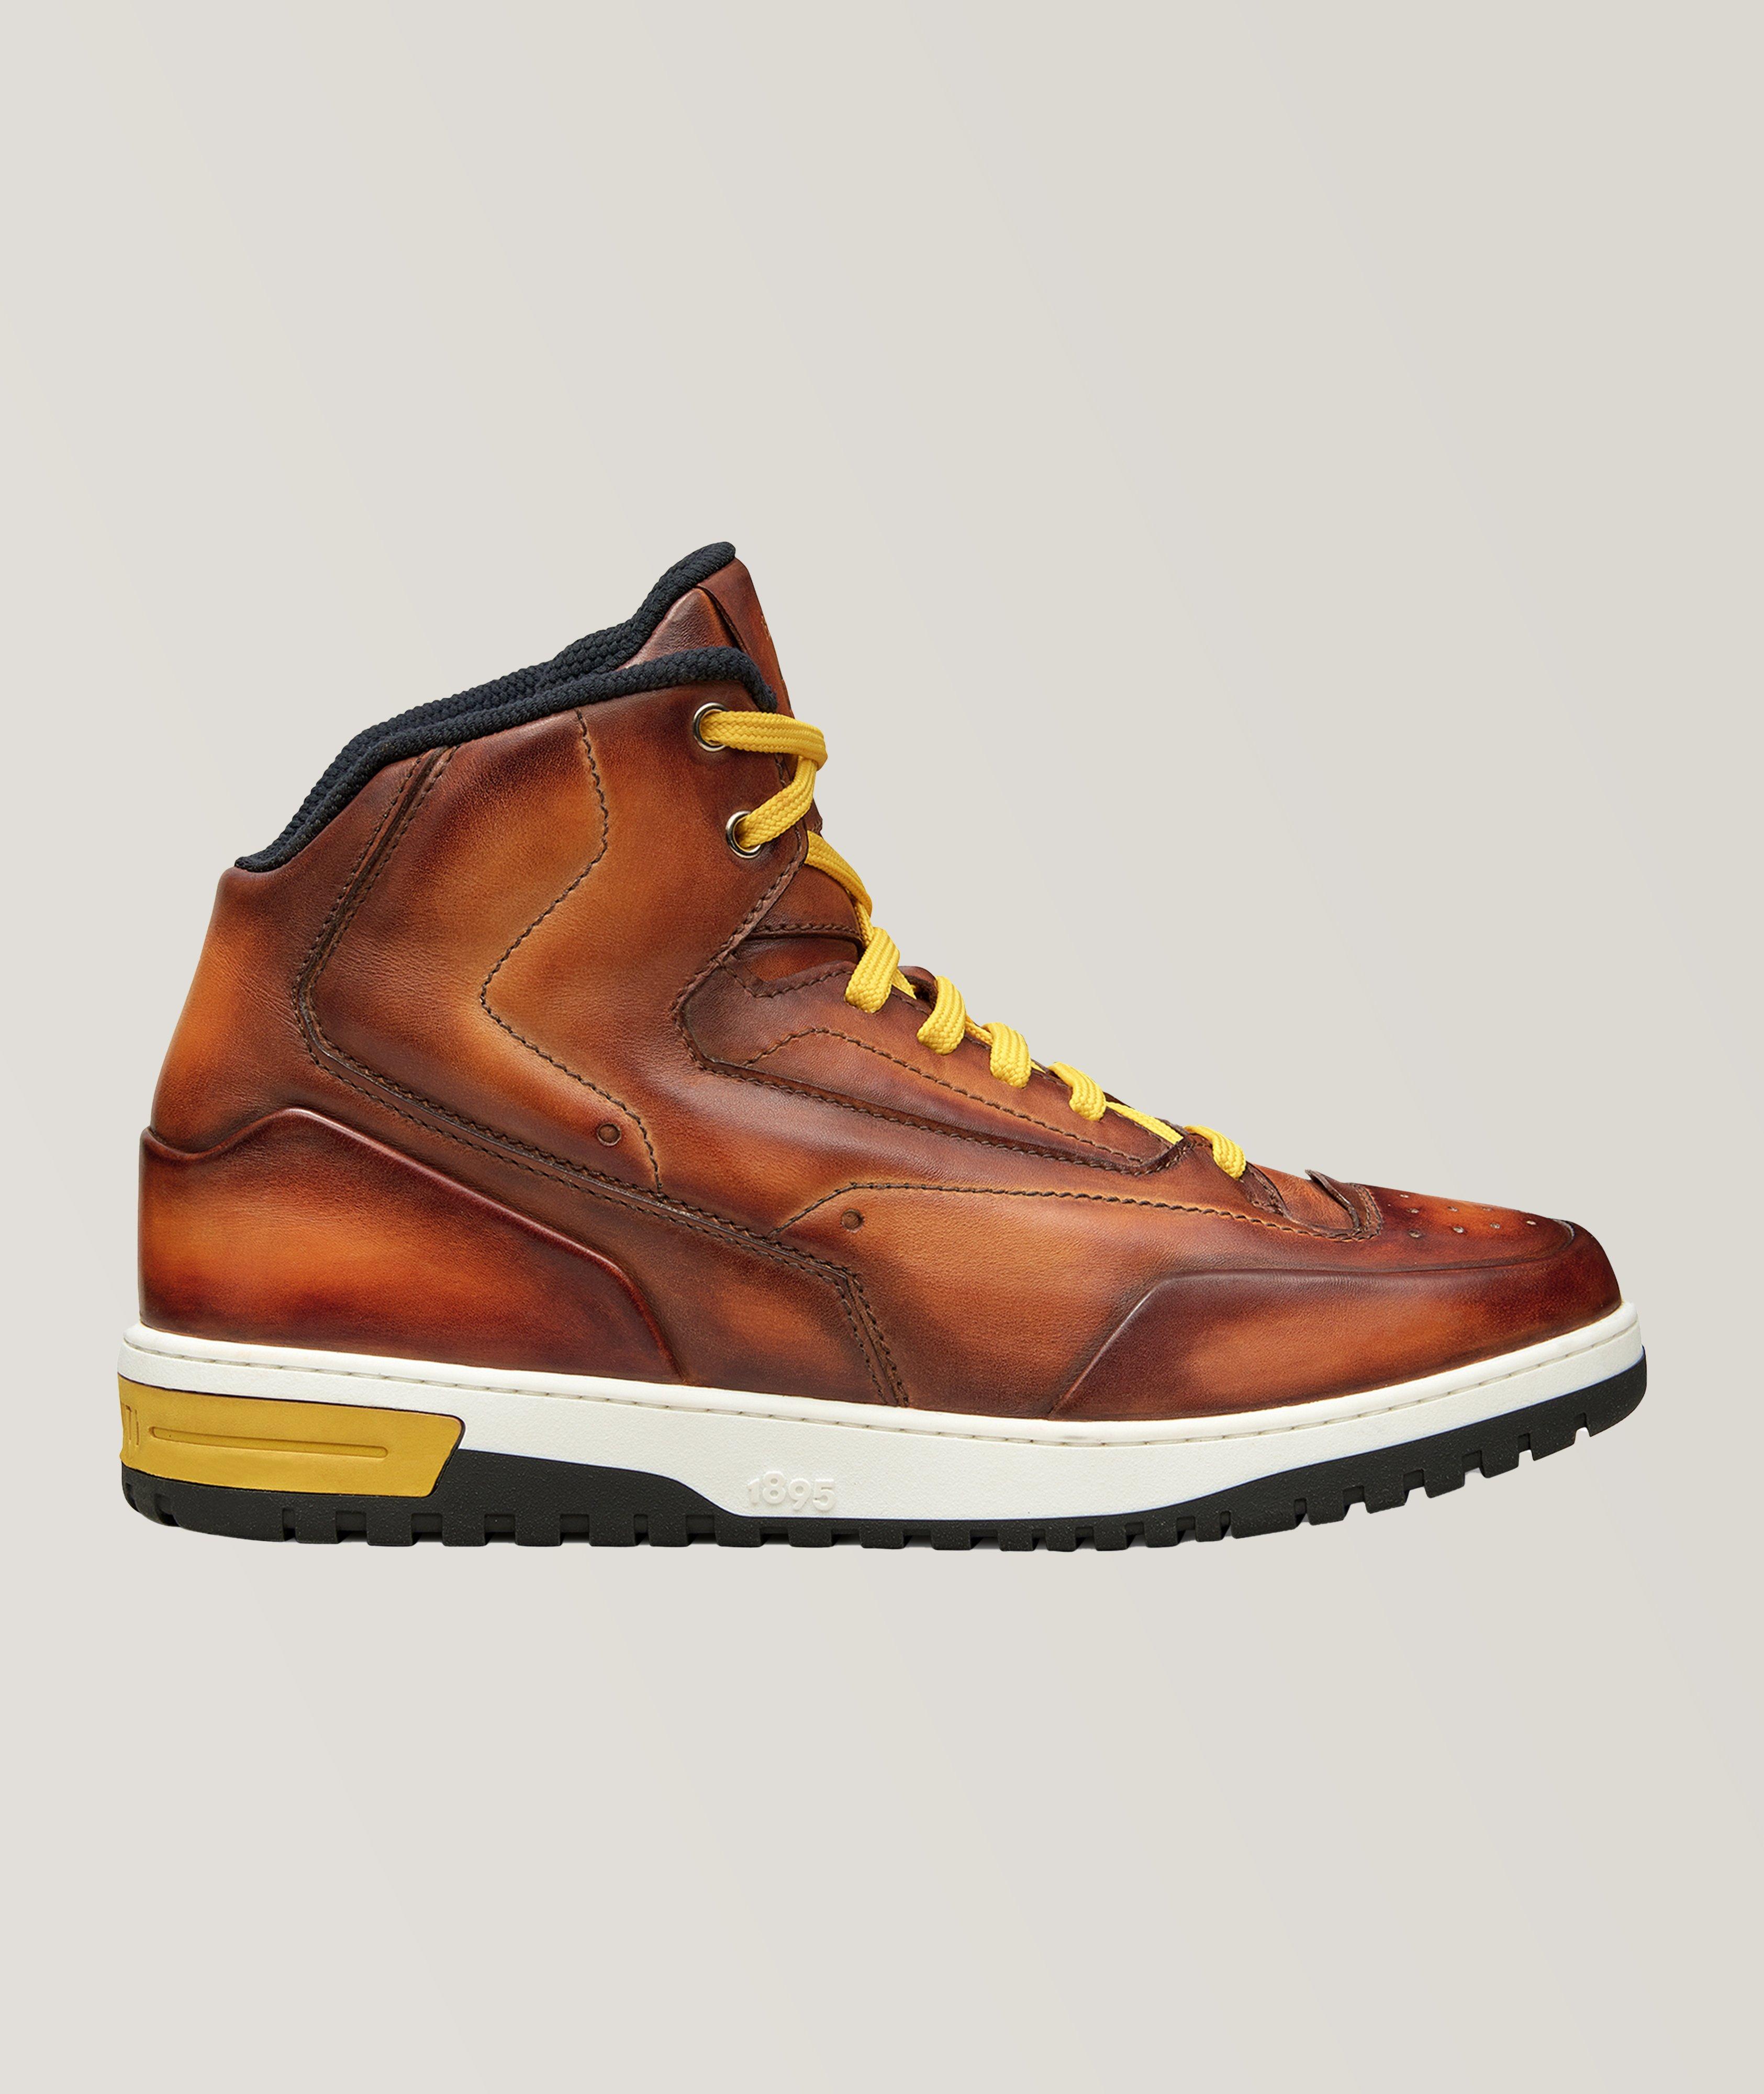 Playoff Leather High Top Sneakers